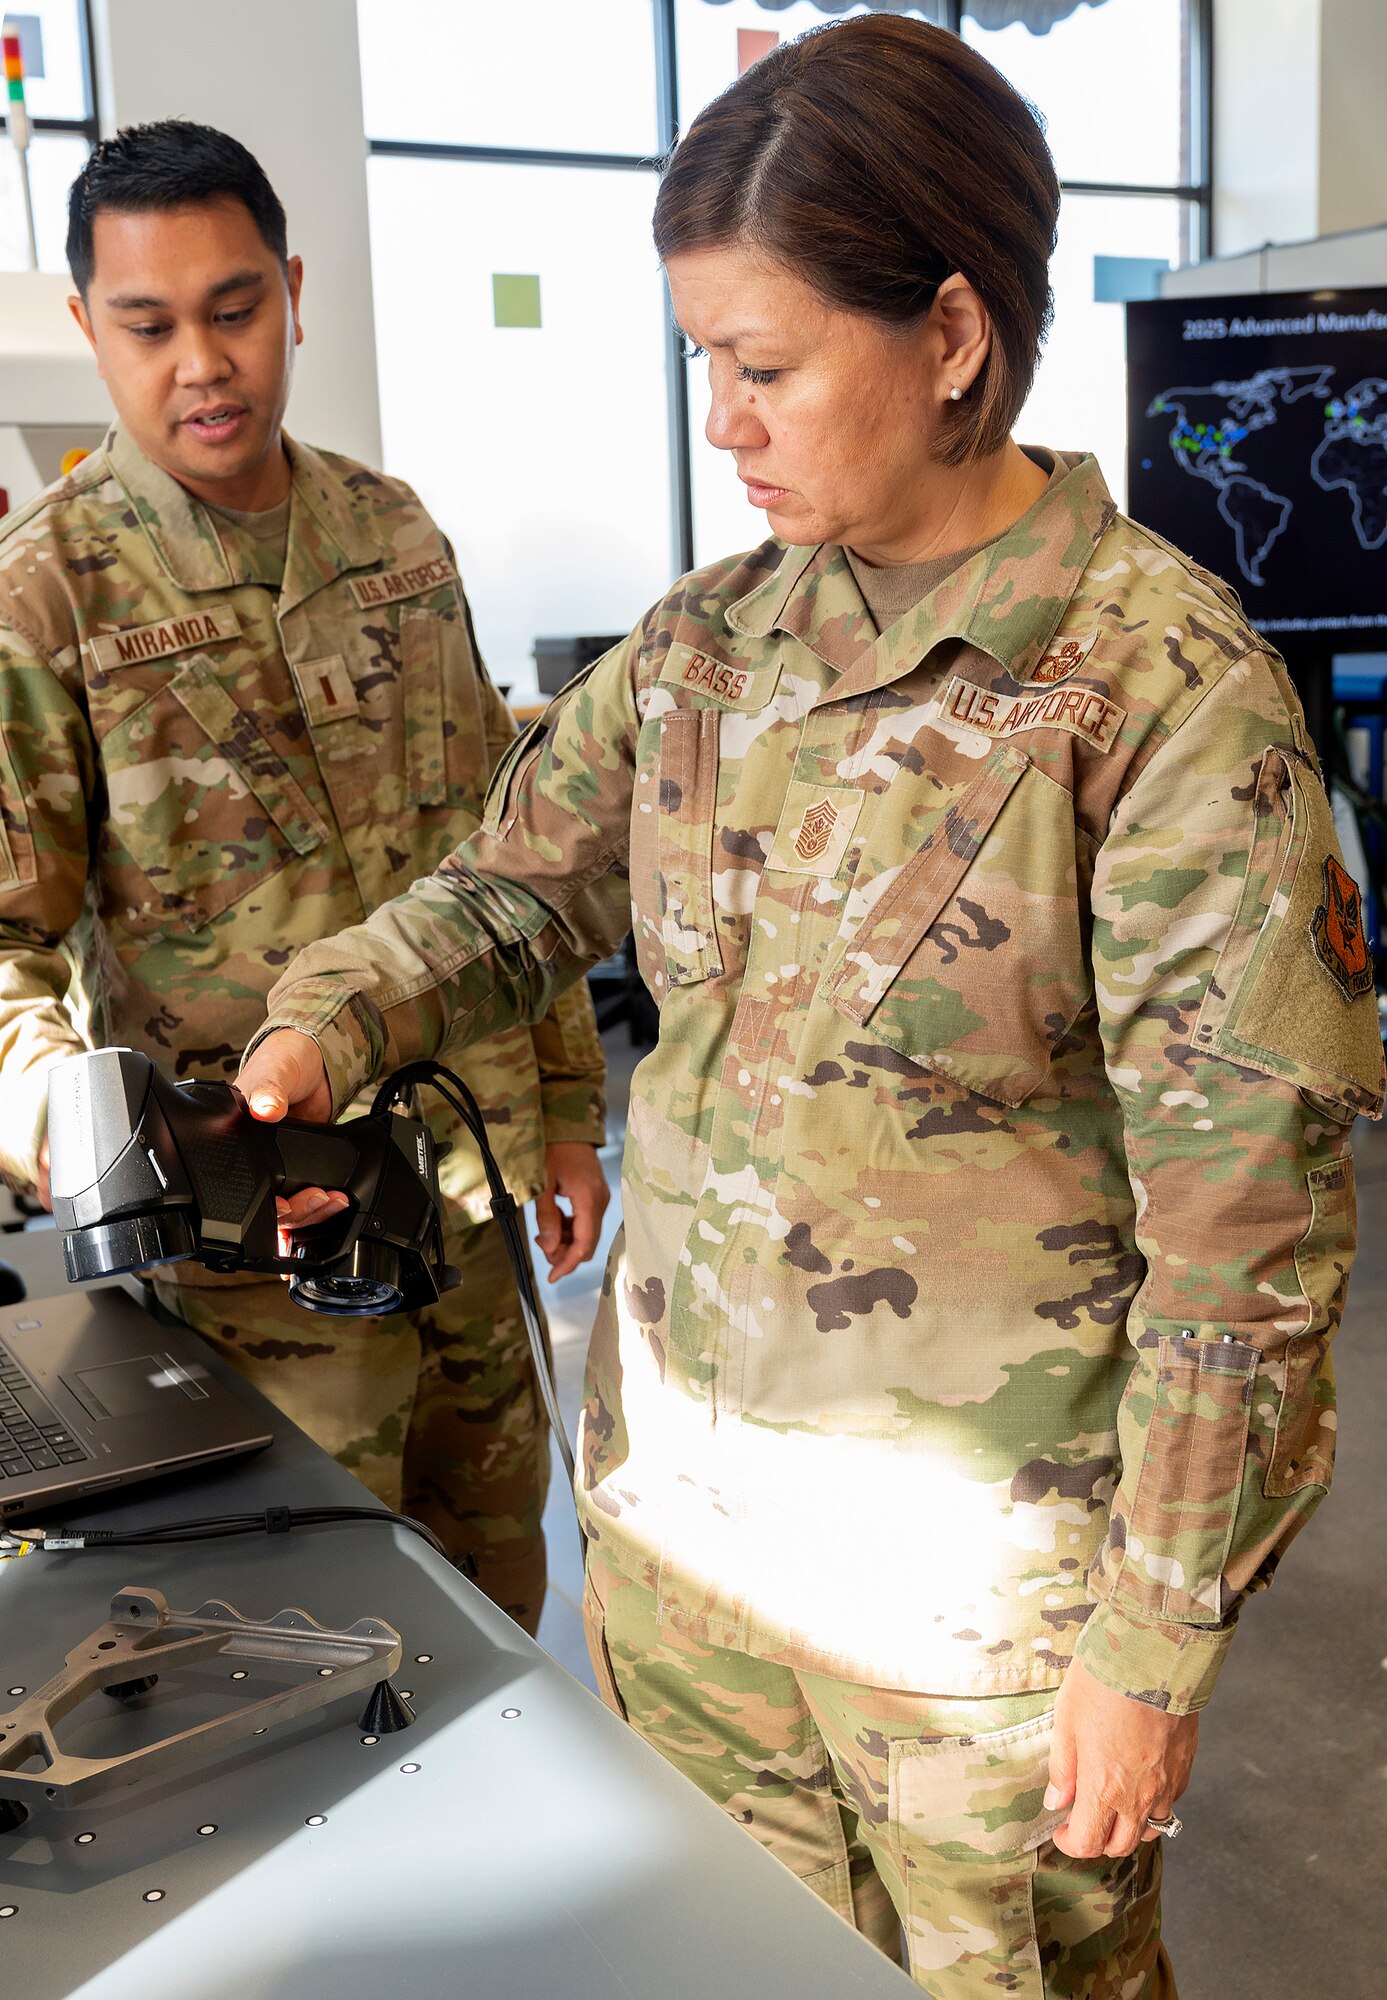 Air Force 2nd Lt. Lewis Miranda (left), Air Force Life Cycle Management Center Rapid Sustainment Office Advance Manufacturing Program, briefs Chief Master Sgt. of the Air Force JoAnne S. Bass on the digital scanning of parts for use in computer assisted design and 3D printing. Bass was in Dayton for the Corona Conference at Wright-Patterson Air Force Base and took the opportunity to learn about innovative programs in the area. (U.S. Air Force photo by R.J. Oriez)